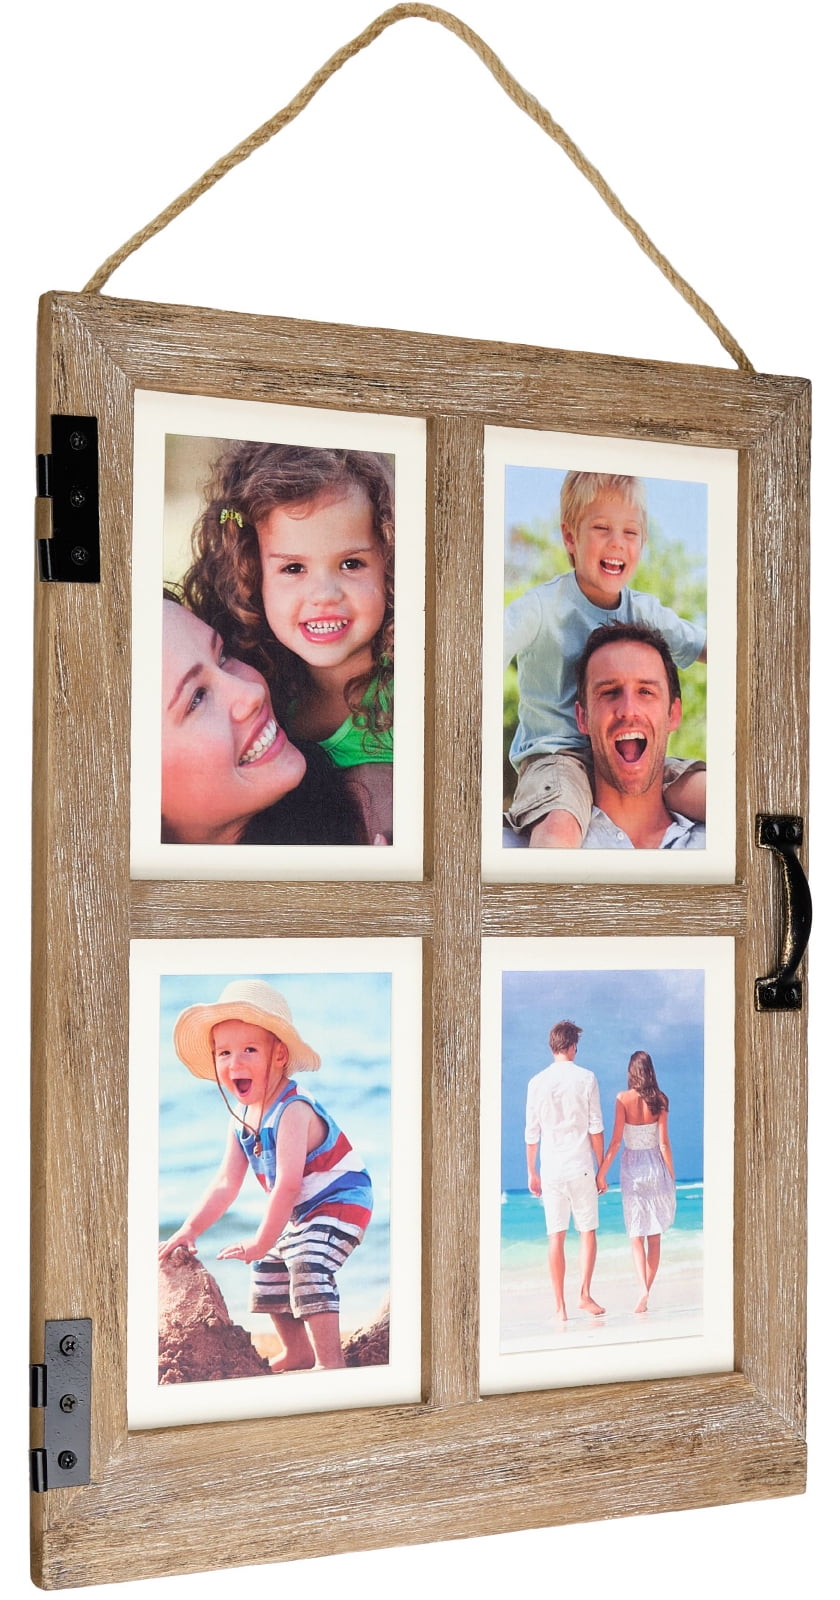 3 X 5 Landscape Portrait Photo Frame Home Decor Birthday Gifts Present Occasions 